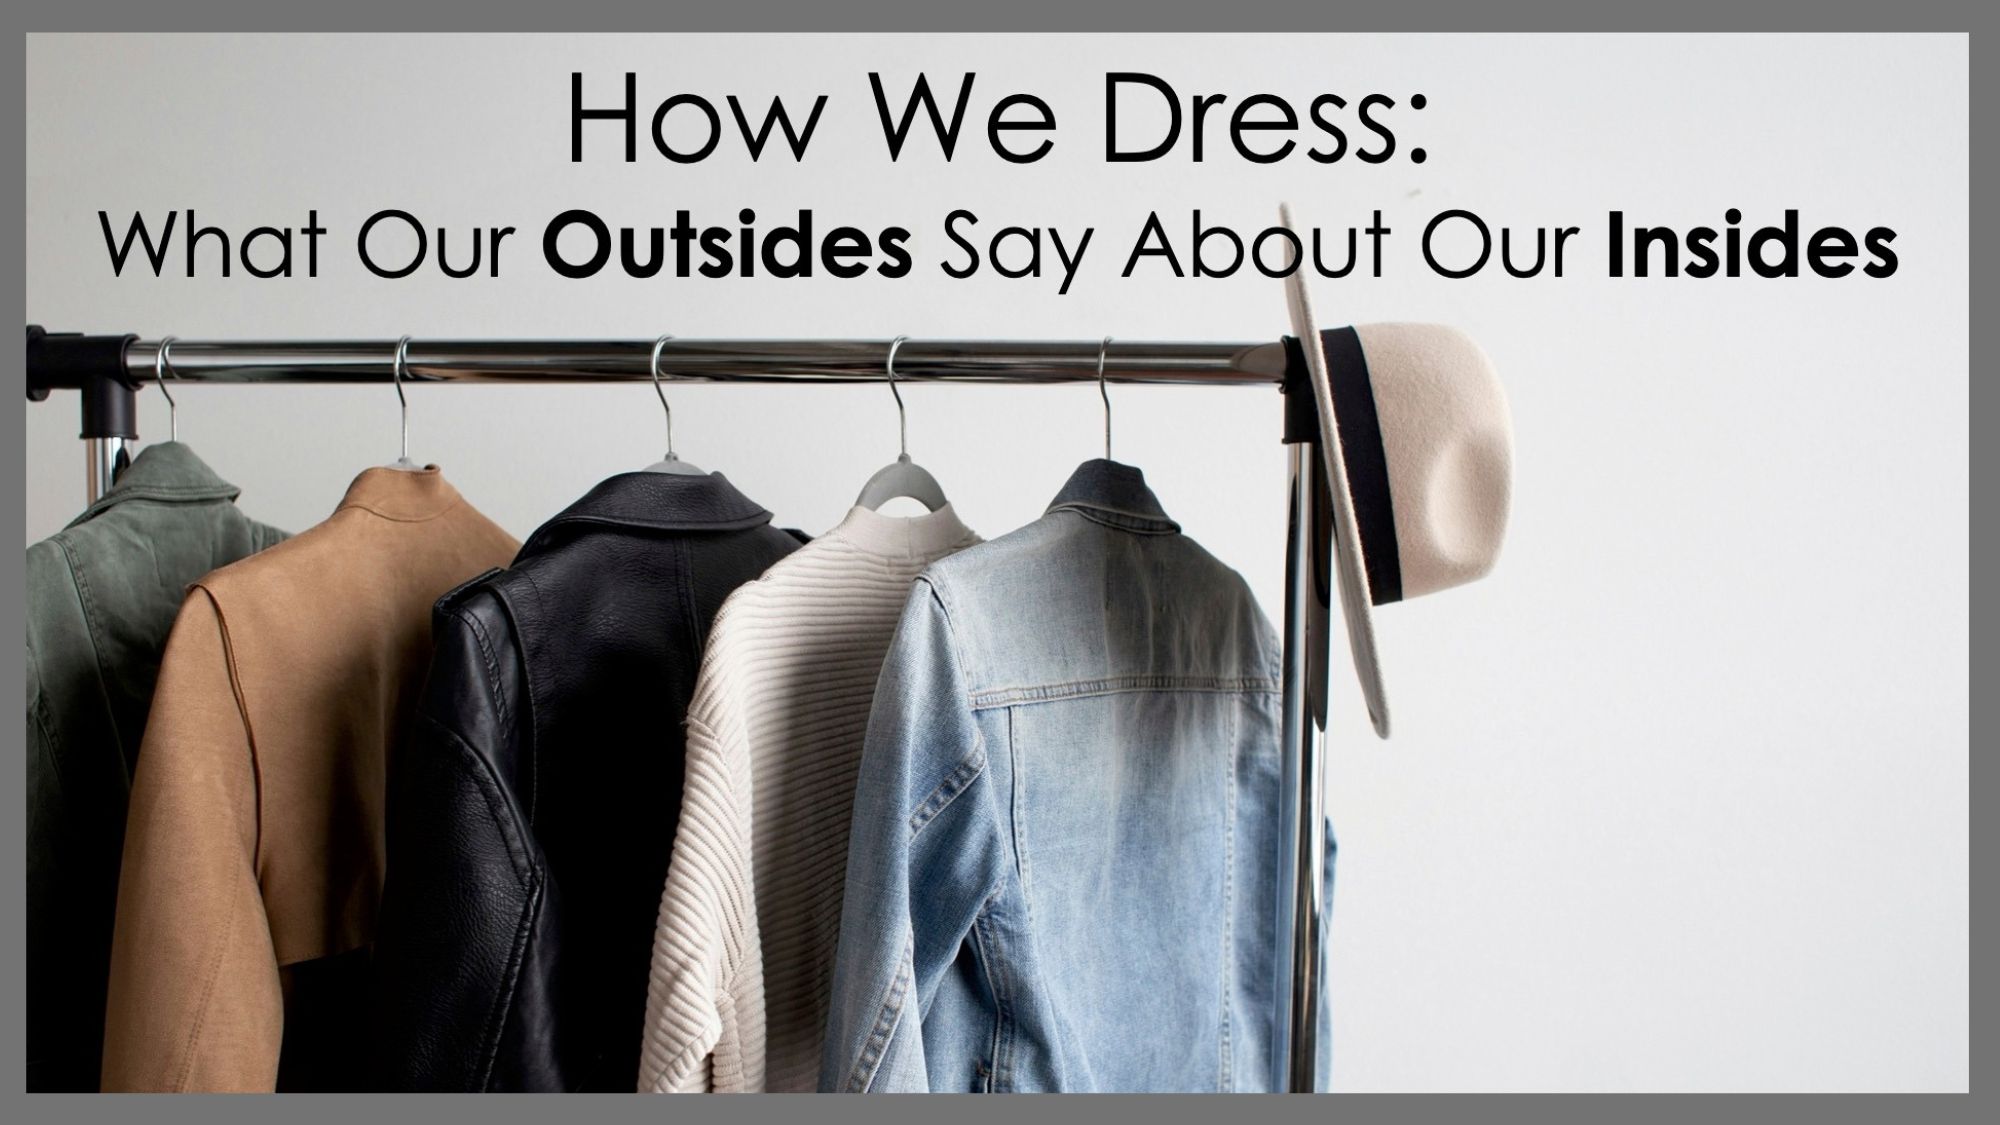 How We Dress: What Our Outsides Say About Our Insides